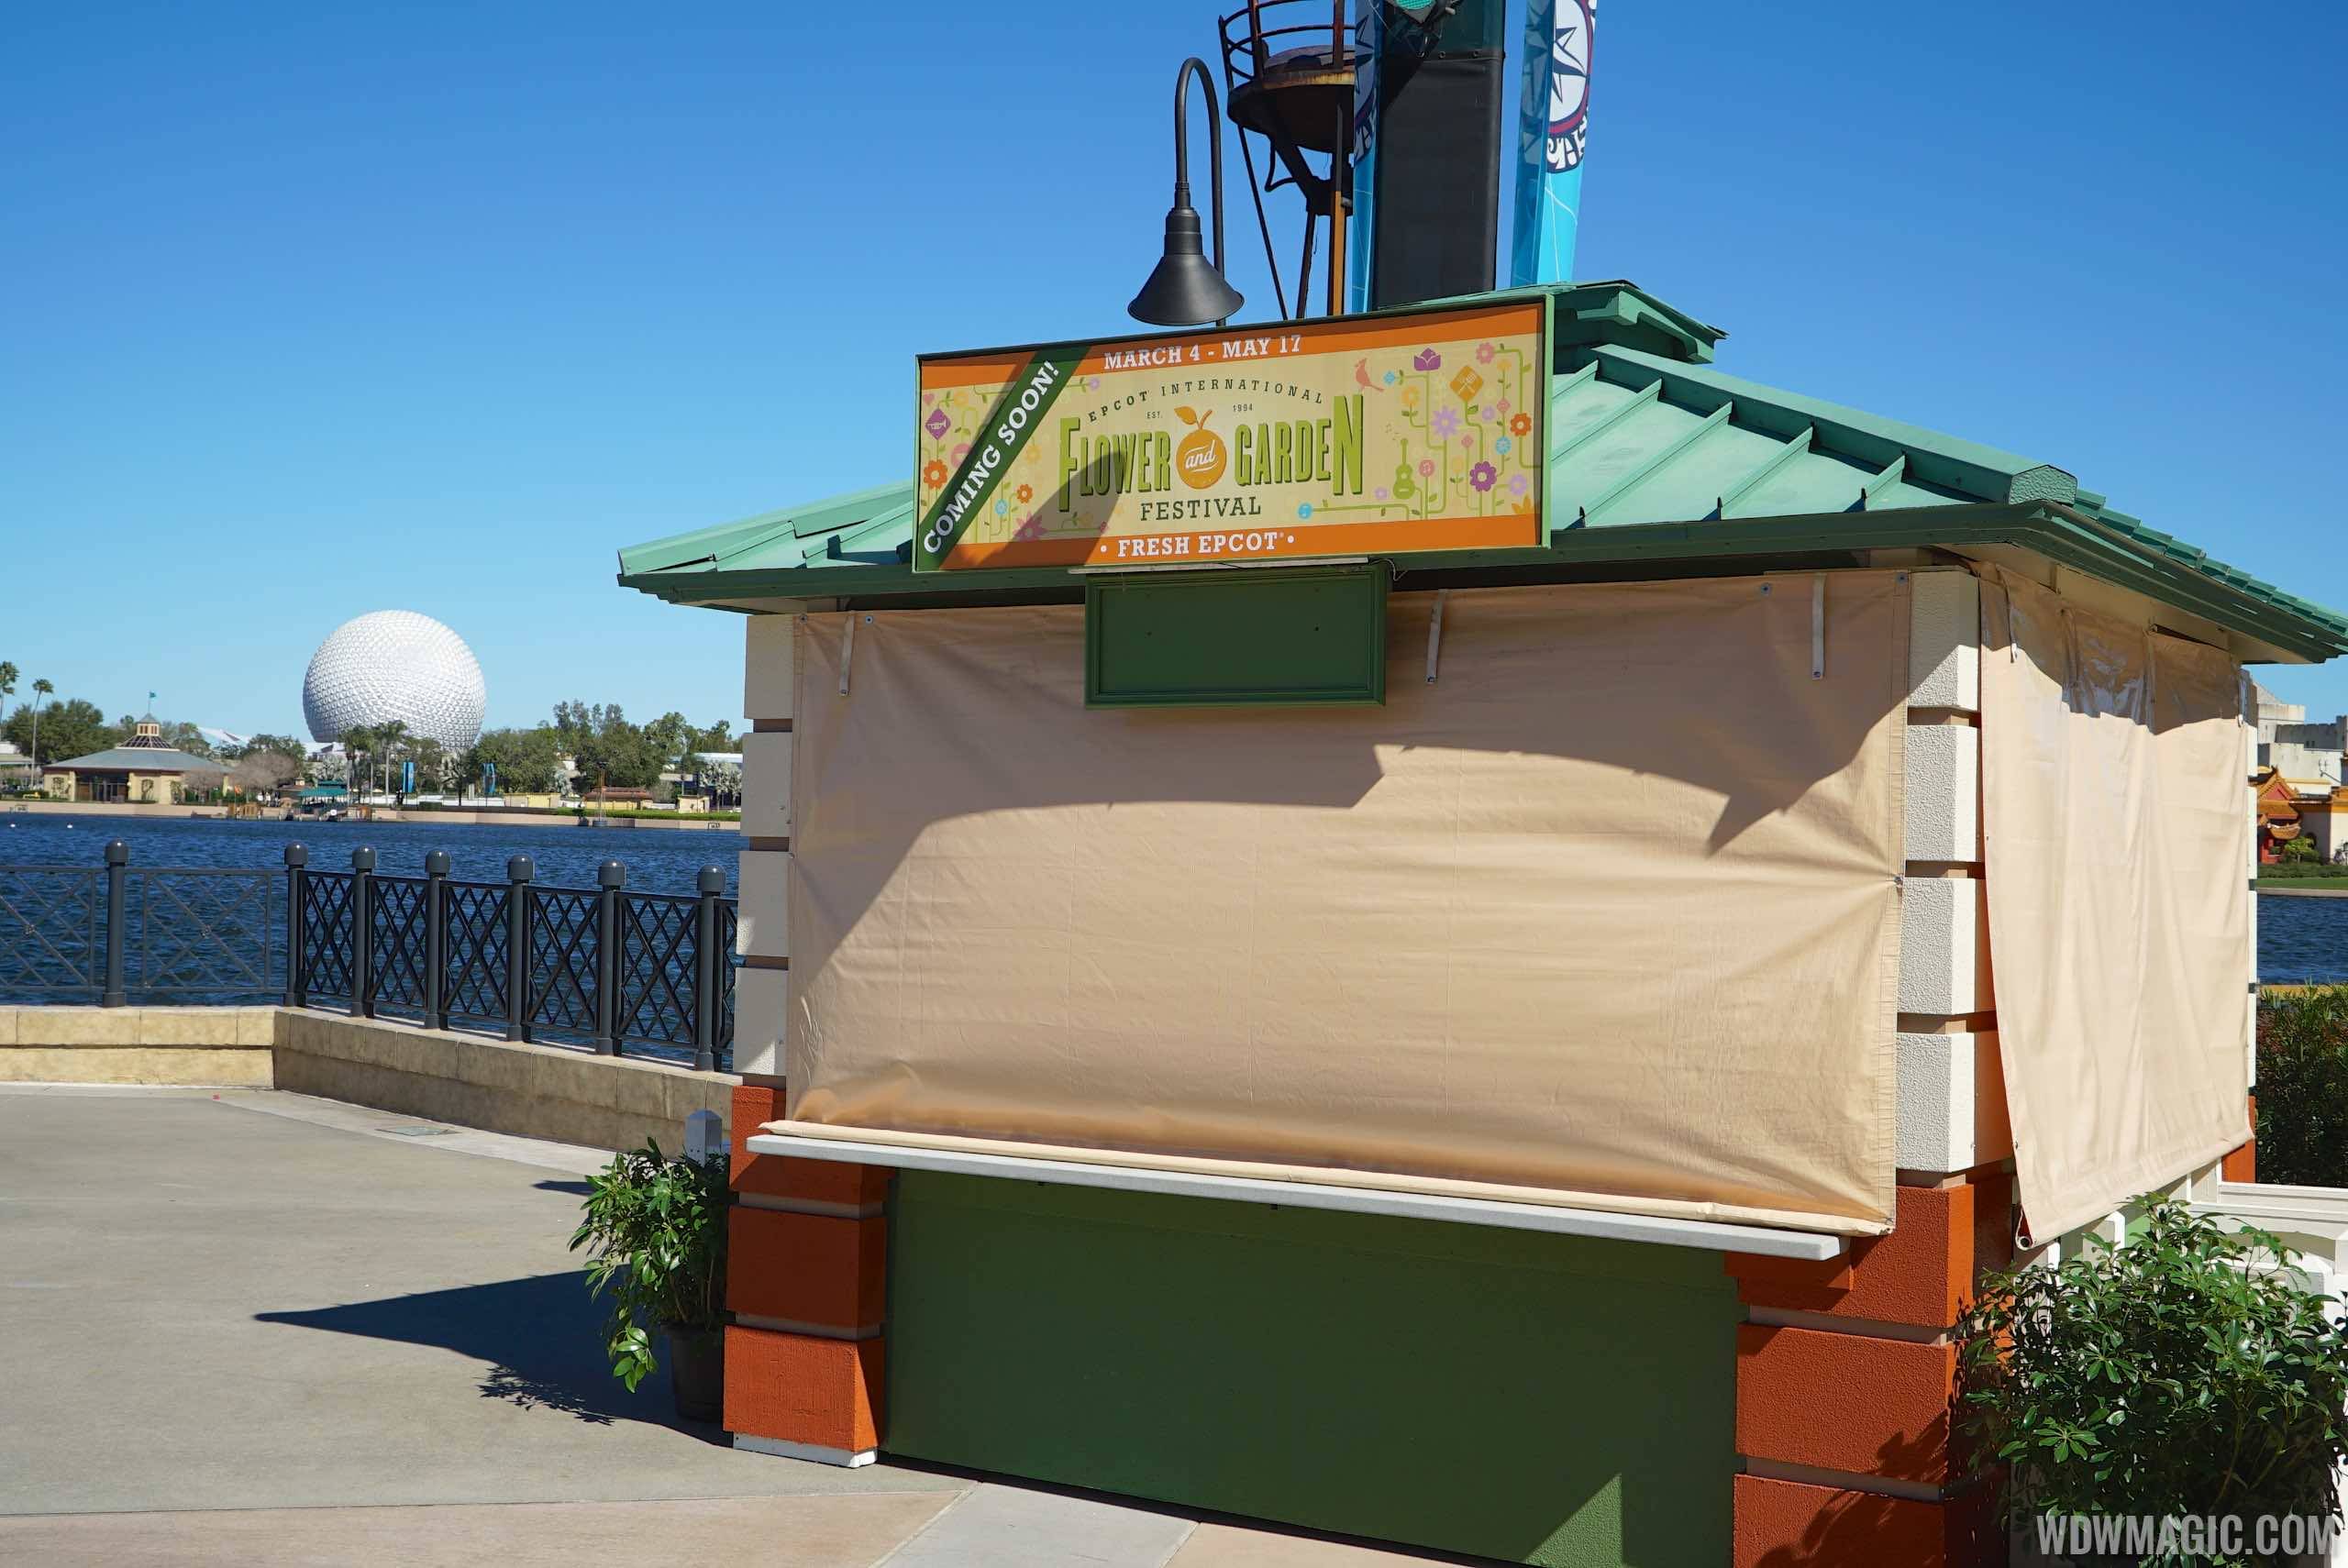 PHOTOS - Topiary and Outdoor Kitchens now being put in place ahead of the 2015 Epcot International Flower and Garden Festival